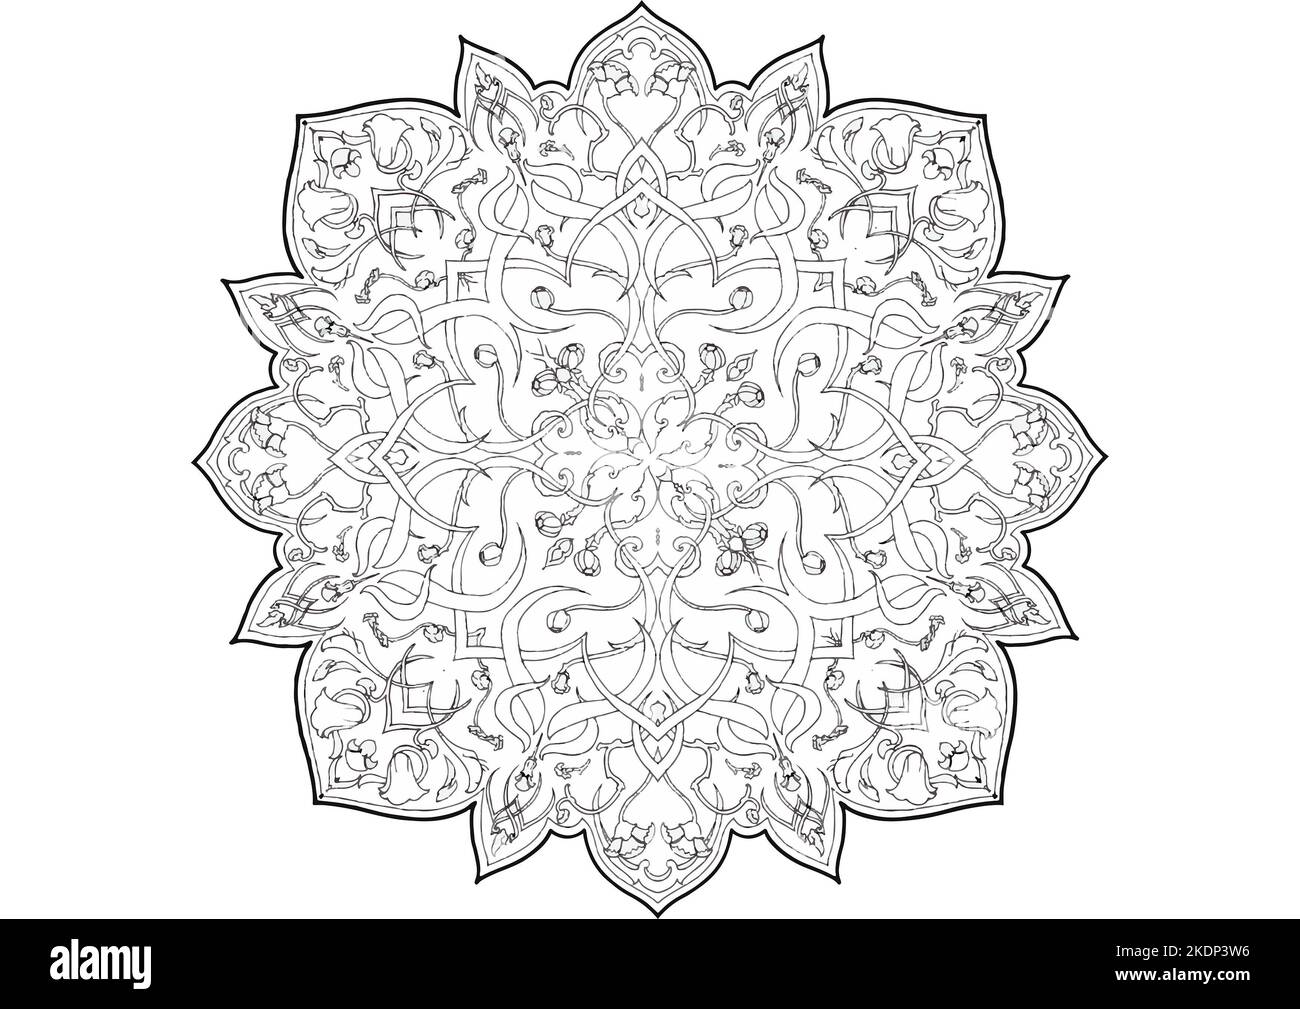 Mantra Mandala, The Meditation art for Adults to coloring Drawing with Hands By Art By Uncle 023  Find out with Patterns of the Universe Stock Photo